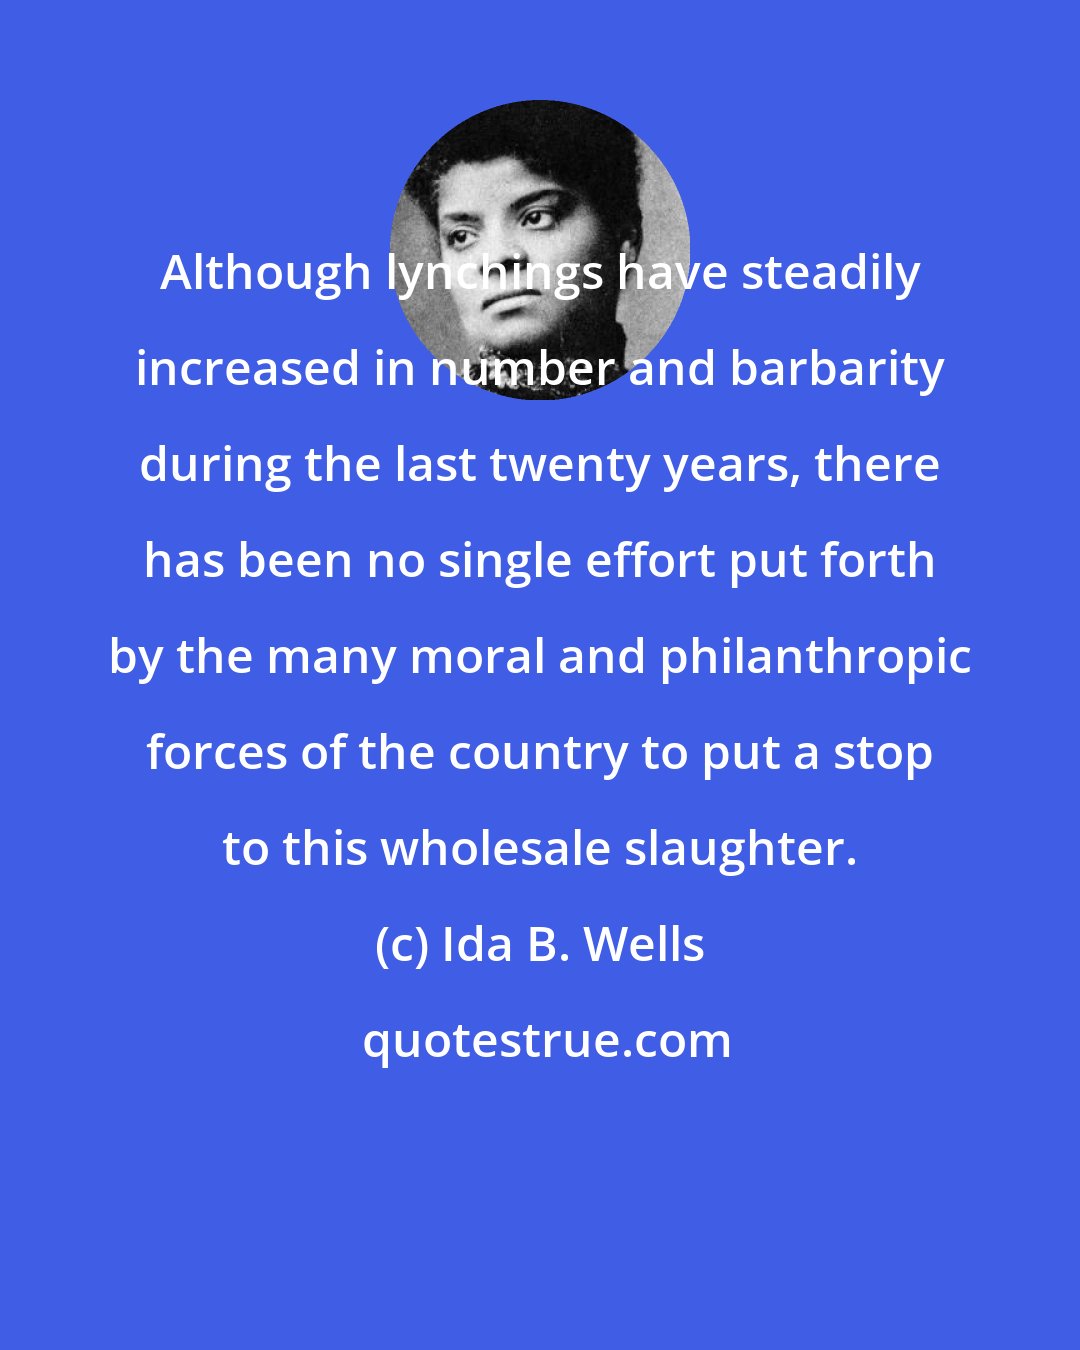 Ida B. Wells: Although lynchings have steadily increased in number and barbarity during the last twenty years, there has been no single effort put forth by the many moral and philanthropic forces of the country to put a stop to this wholesale slaughter.